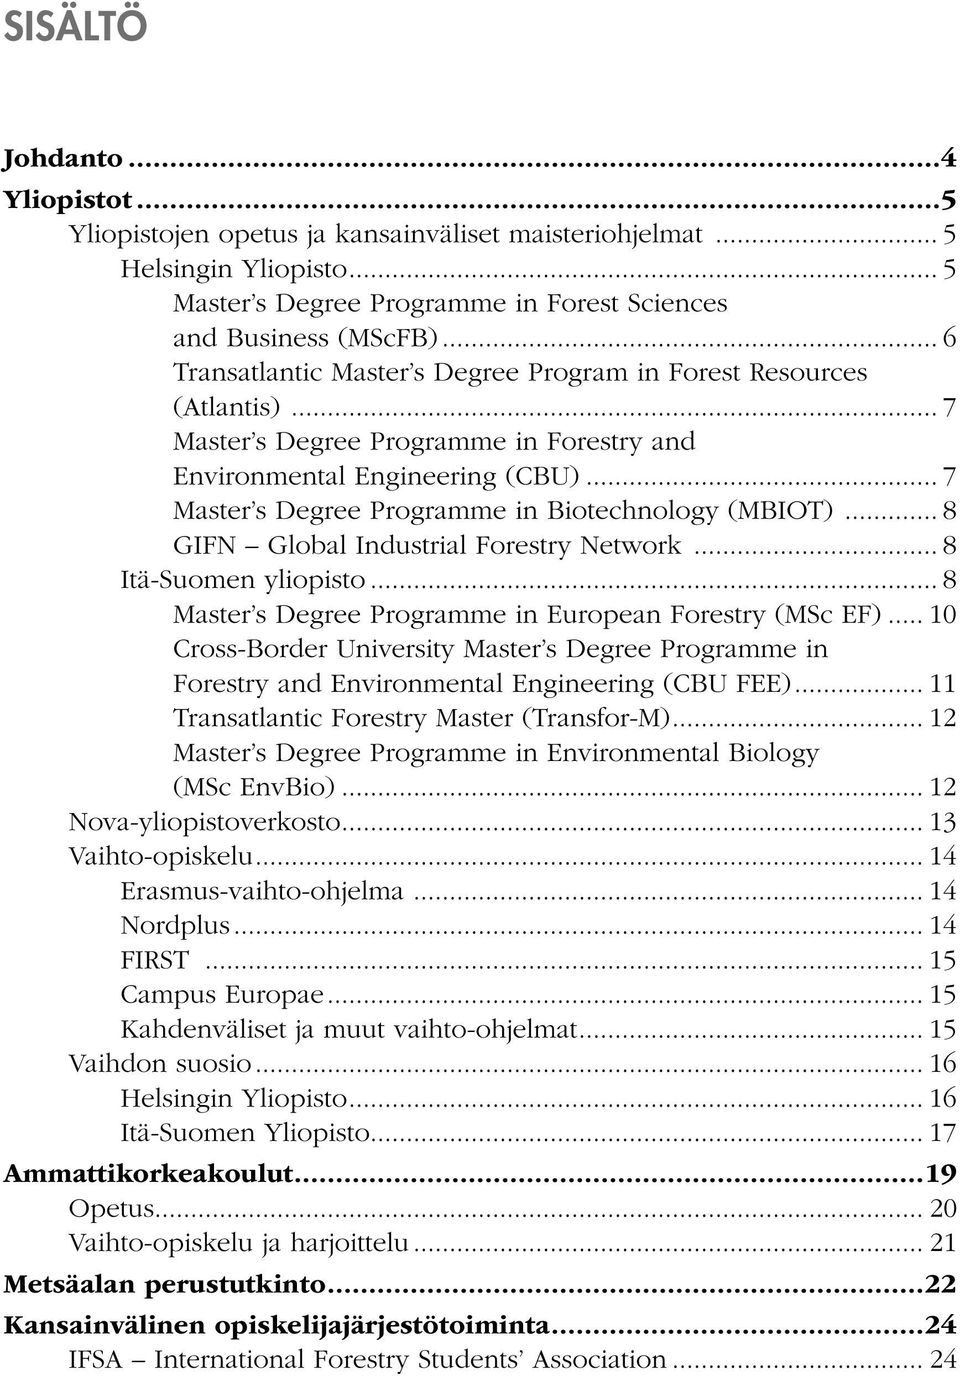 .. 7 Master s Degree Programme in Biotechnology (MBIOT)... 8 GIFN Global Industrial Forestry Network... 8 Itä-Suomen yliopisto... 8 Master s Degree Programme in European Forestry (MSc EF).